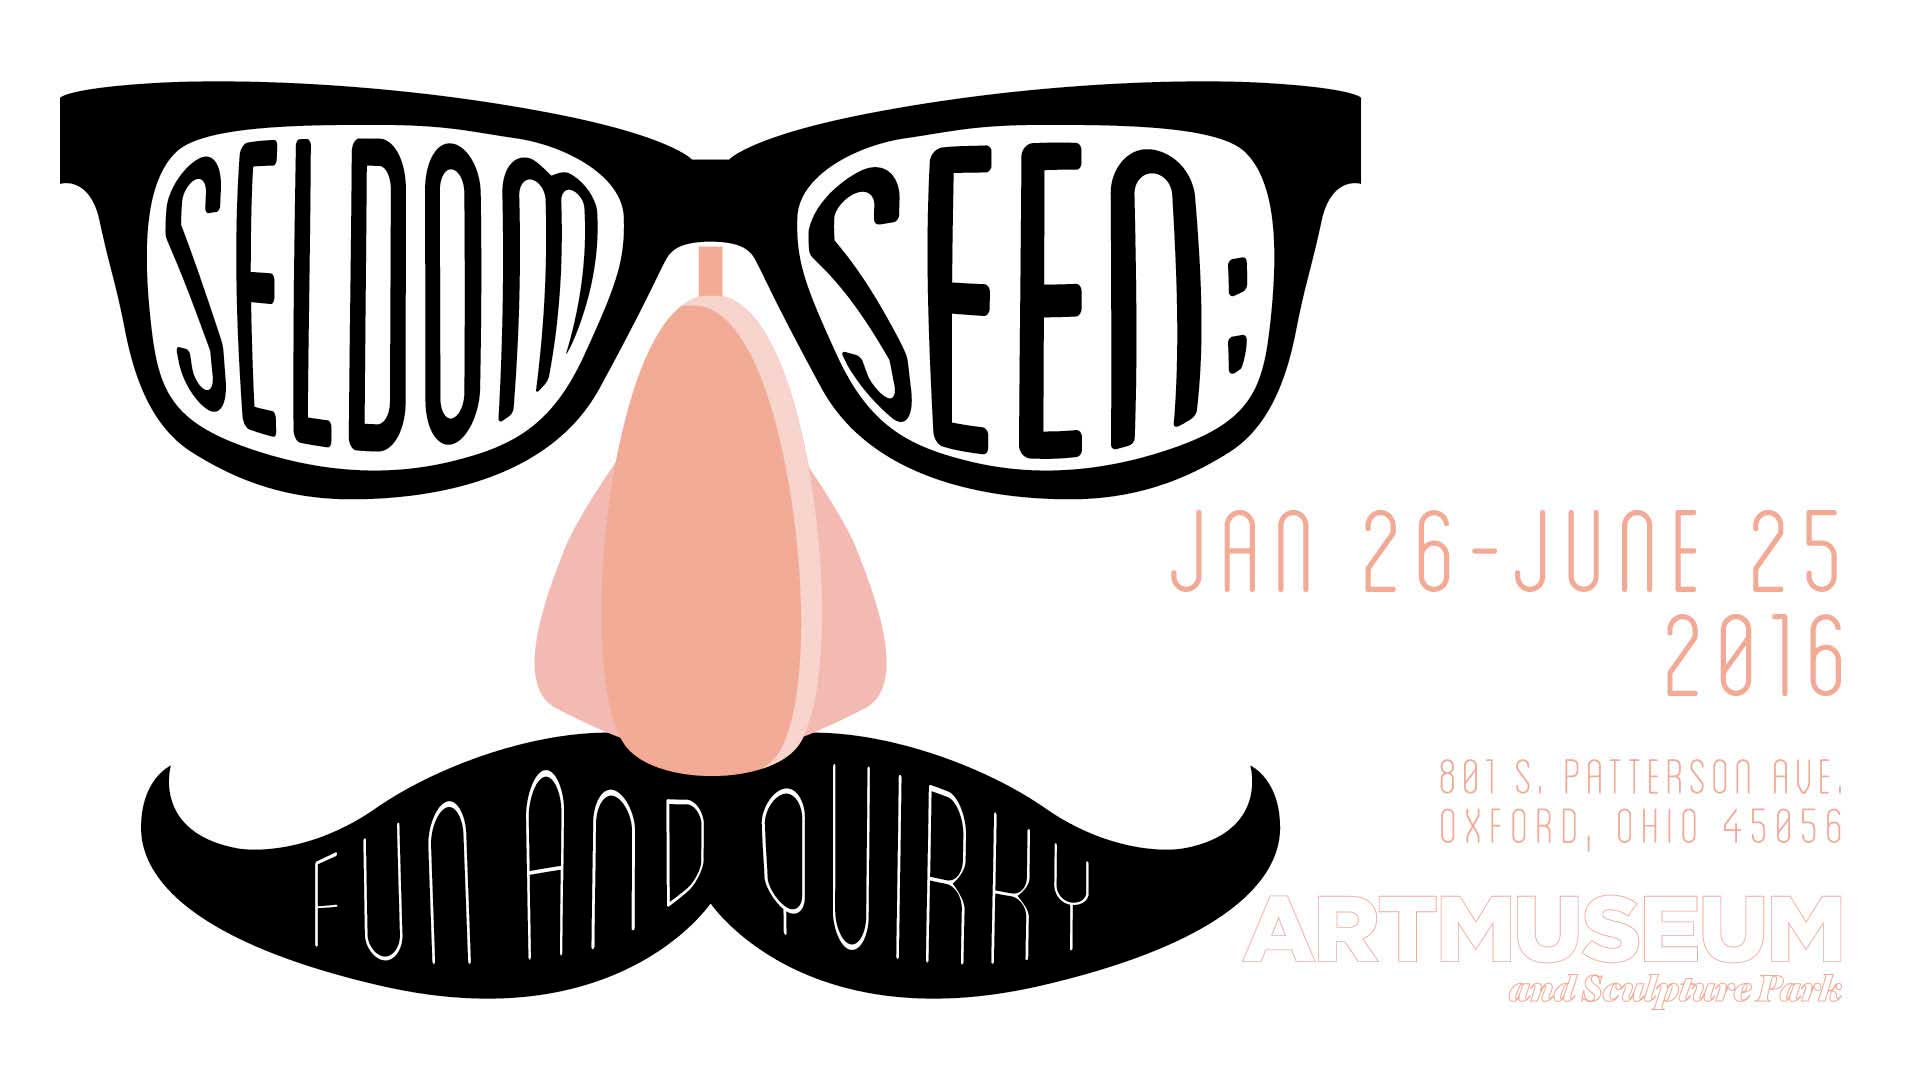 Seldom Seen: Fun and Quirky January 26 - June 25, 2016